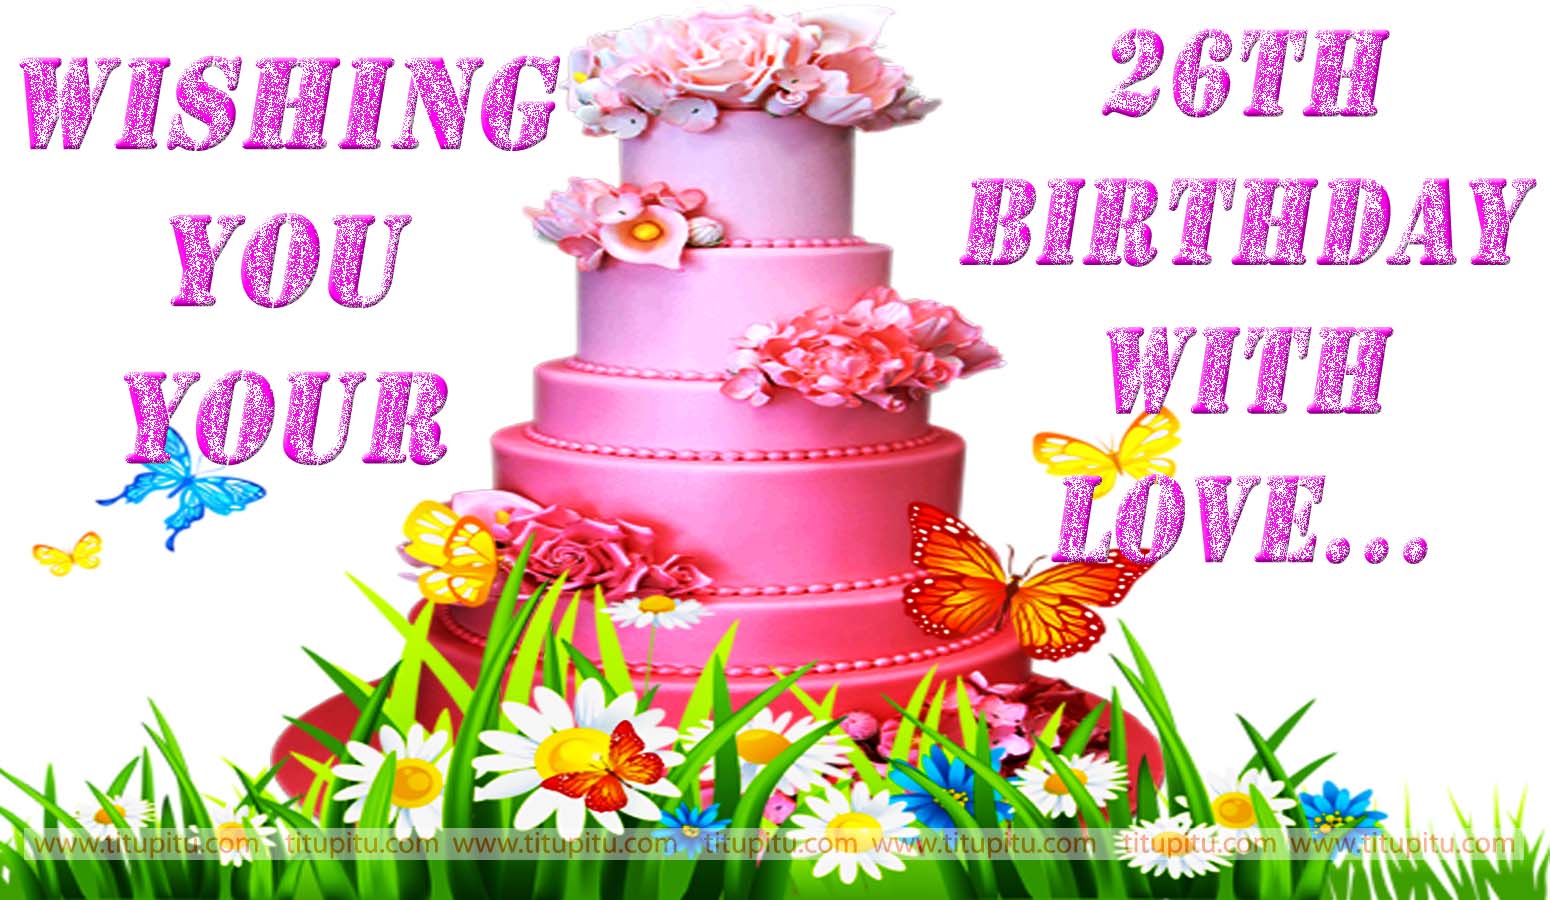 birthday wallpaper with quotes,cake decorating,sugar paste,cake decorating supply,cake,icing